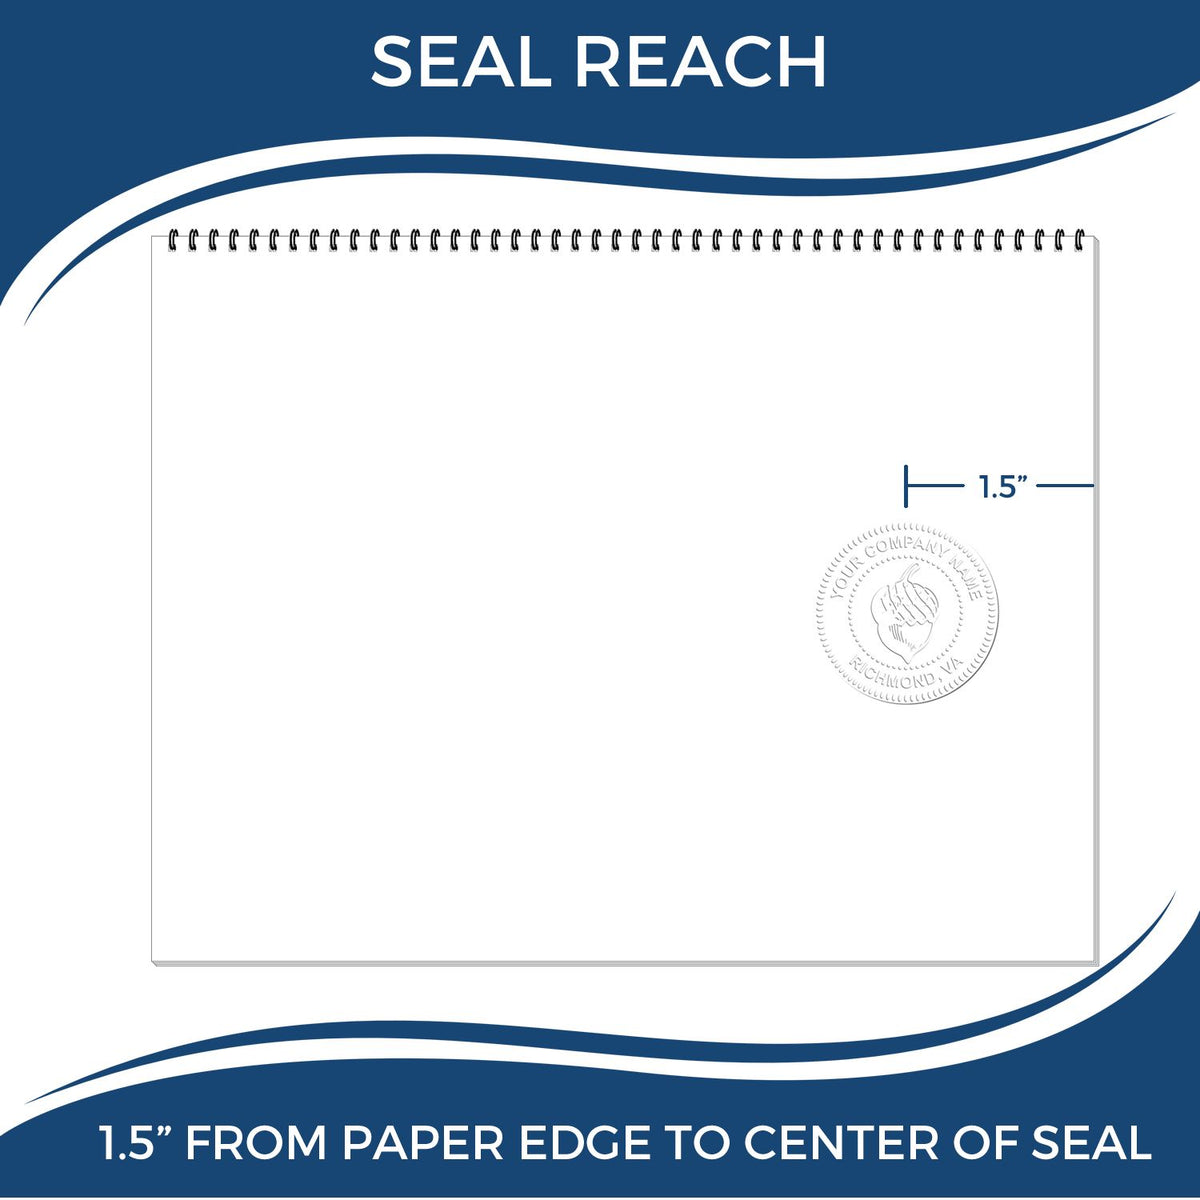 An infographic showing the seal reach which is represented by a ruler and a miniature seal image of the Soft Wisconsin Professional Geologist Seal